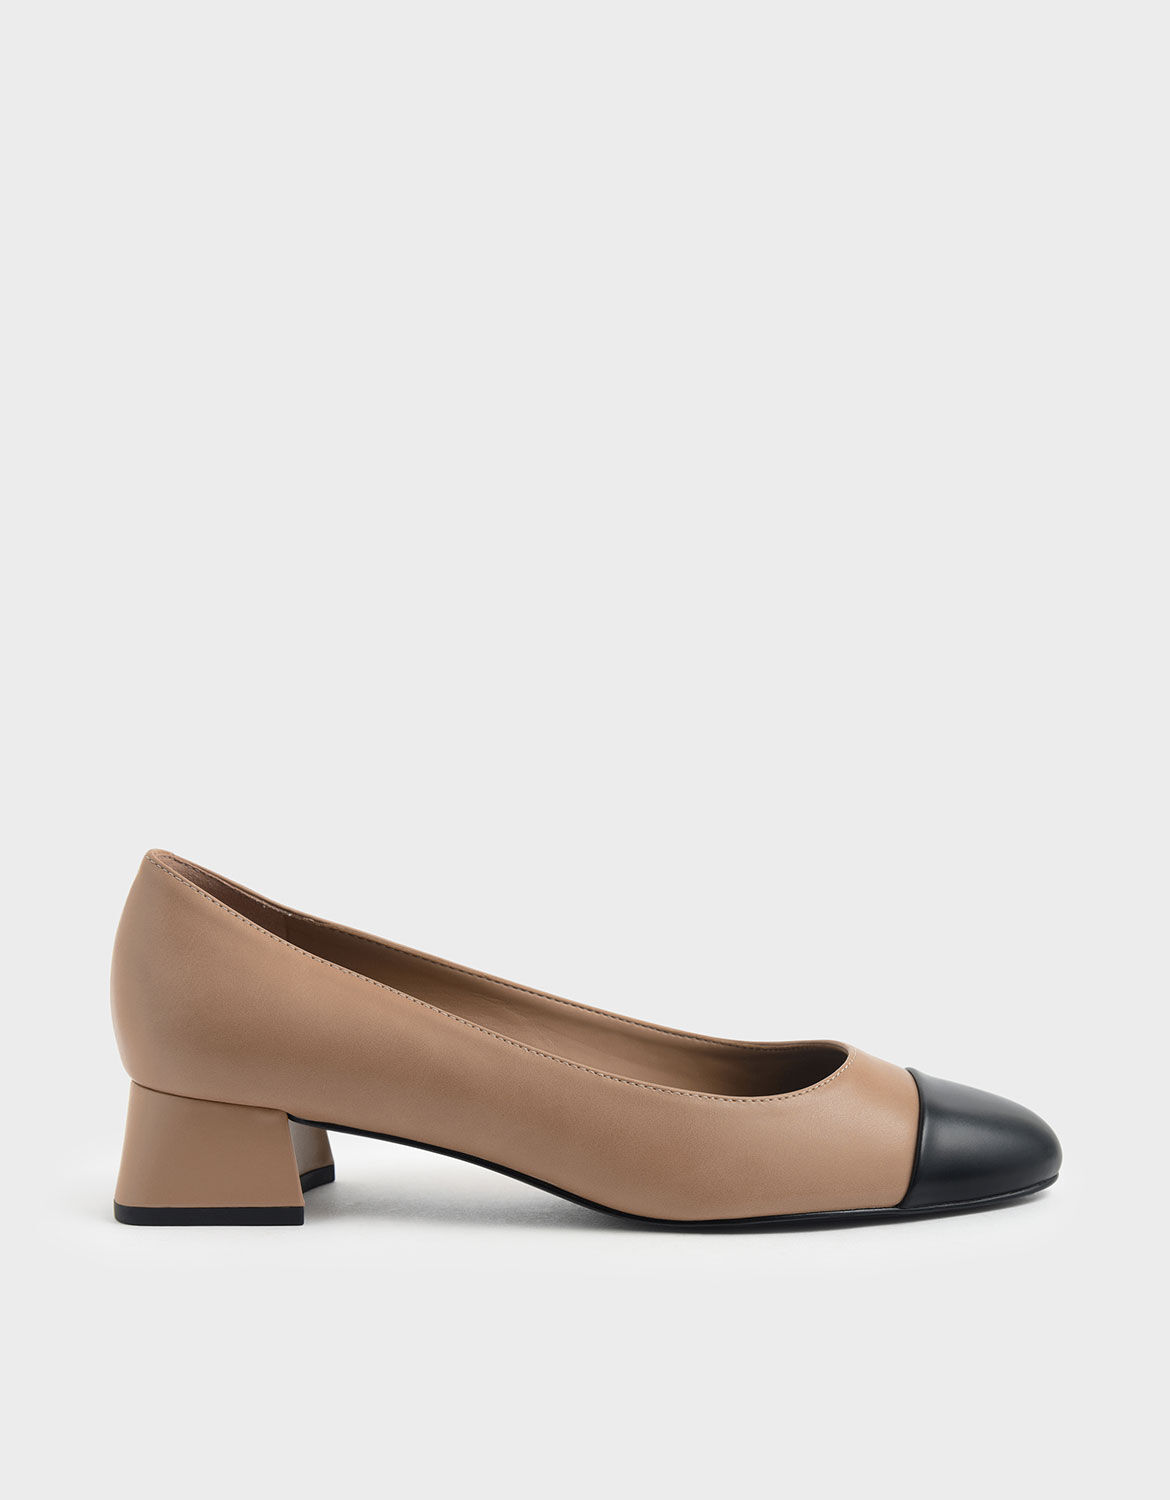 round toe court shoes